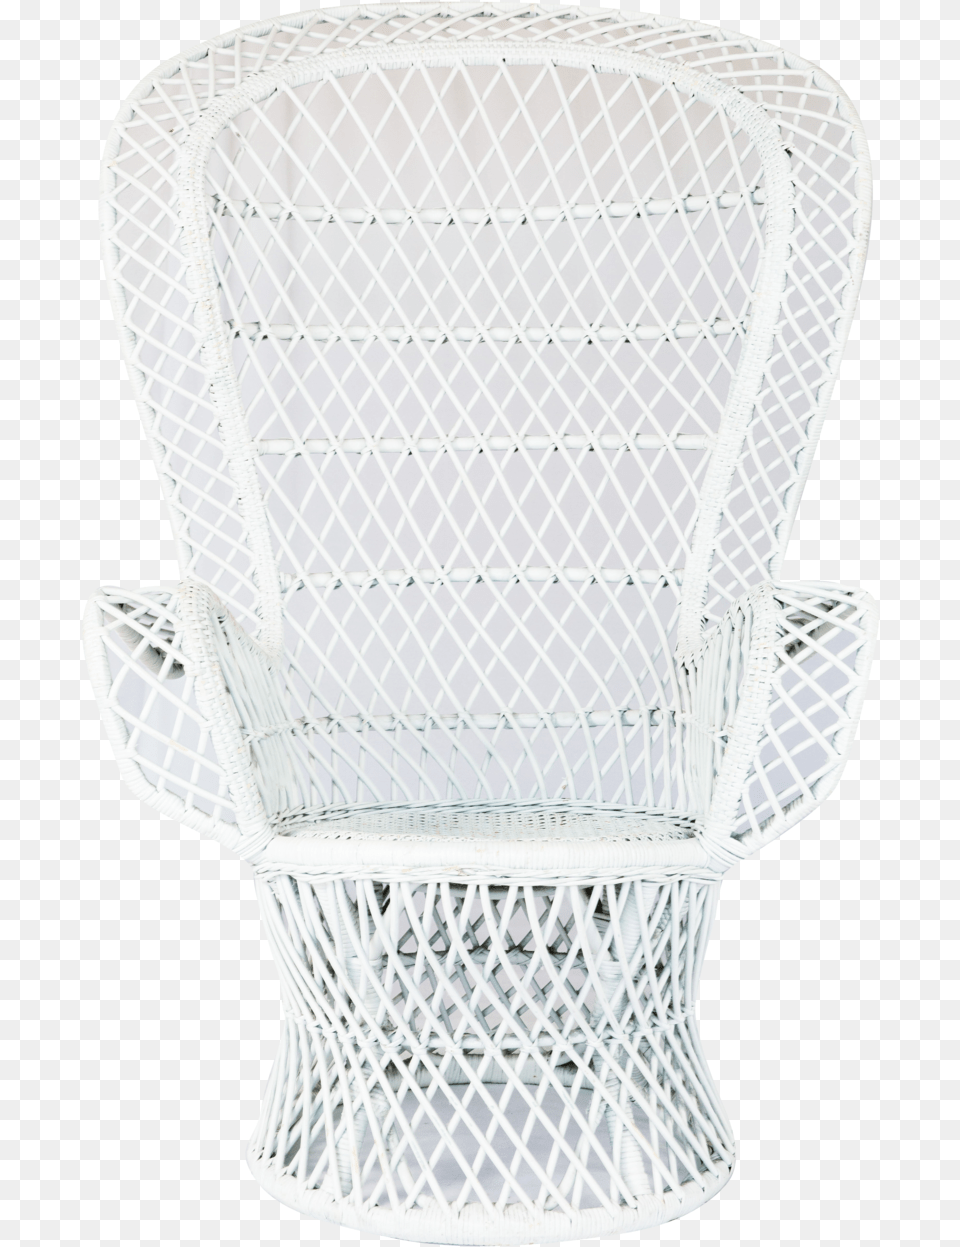 King Lunalilo Peacock Chair, Furniture, Crib, Infant Bed, Armchair Free Transparent Png